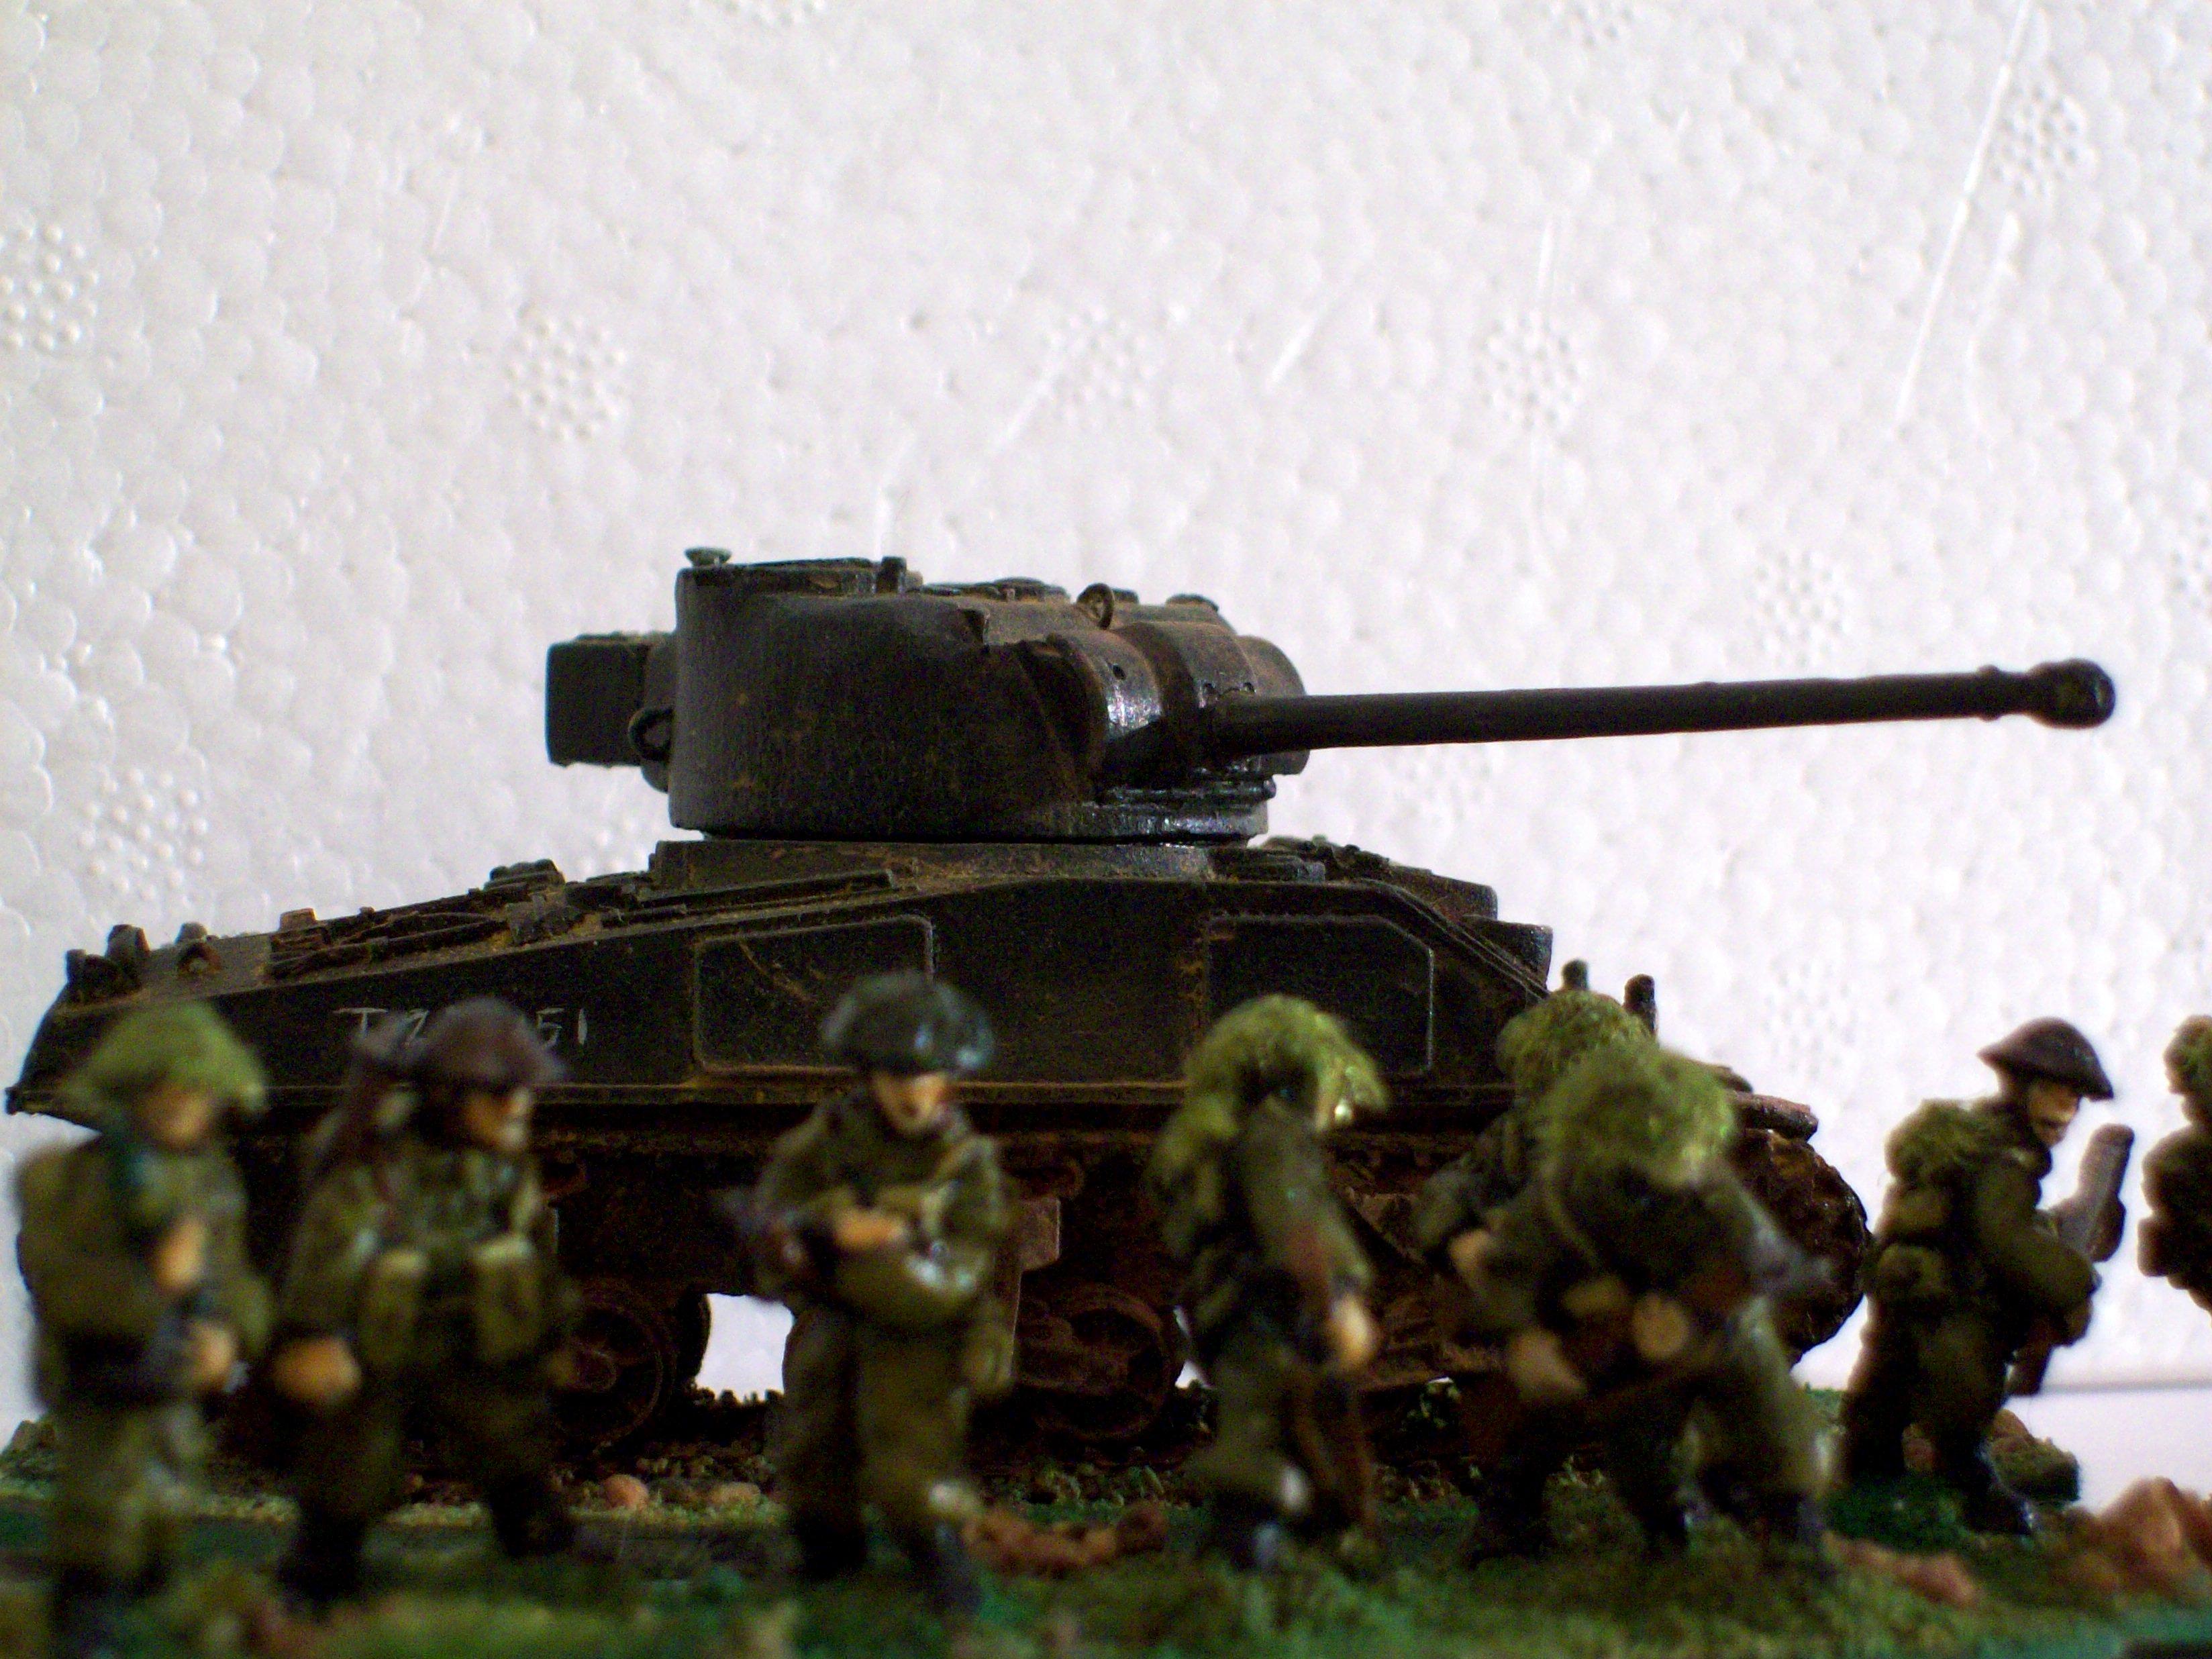 15mm Wwii British Platoon And Sherman Firefly, Based For A Game Called Crossfire